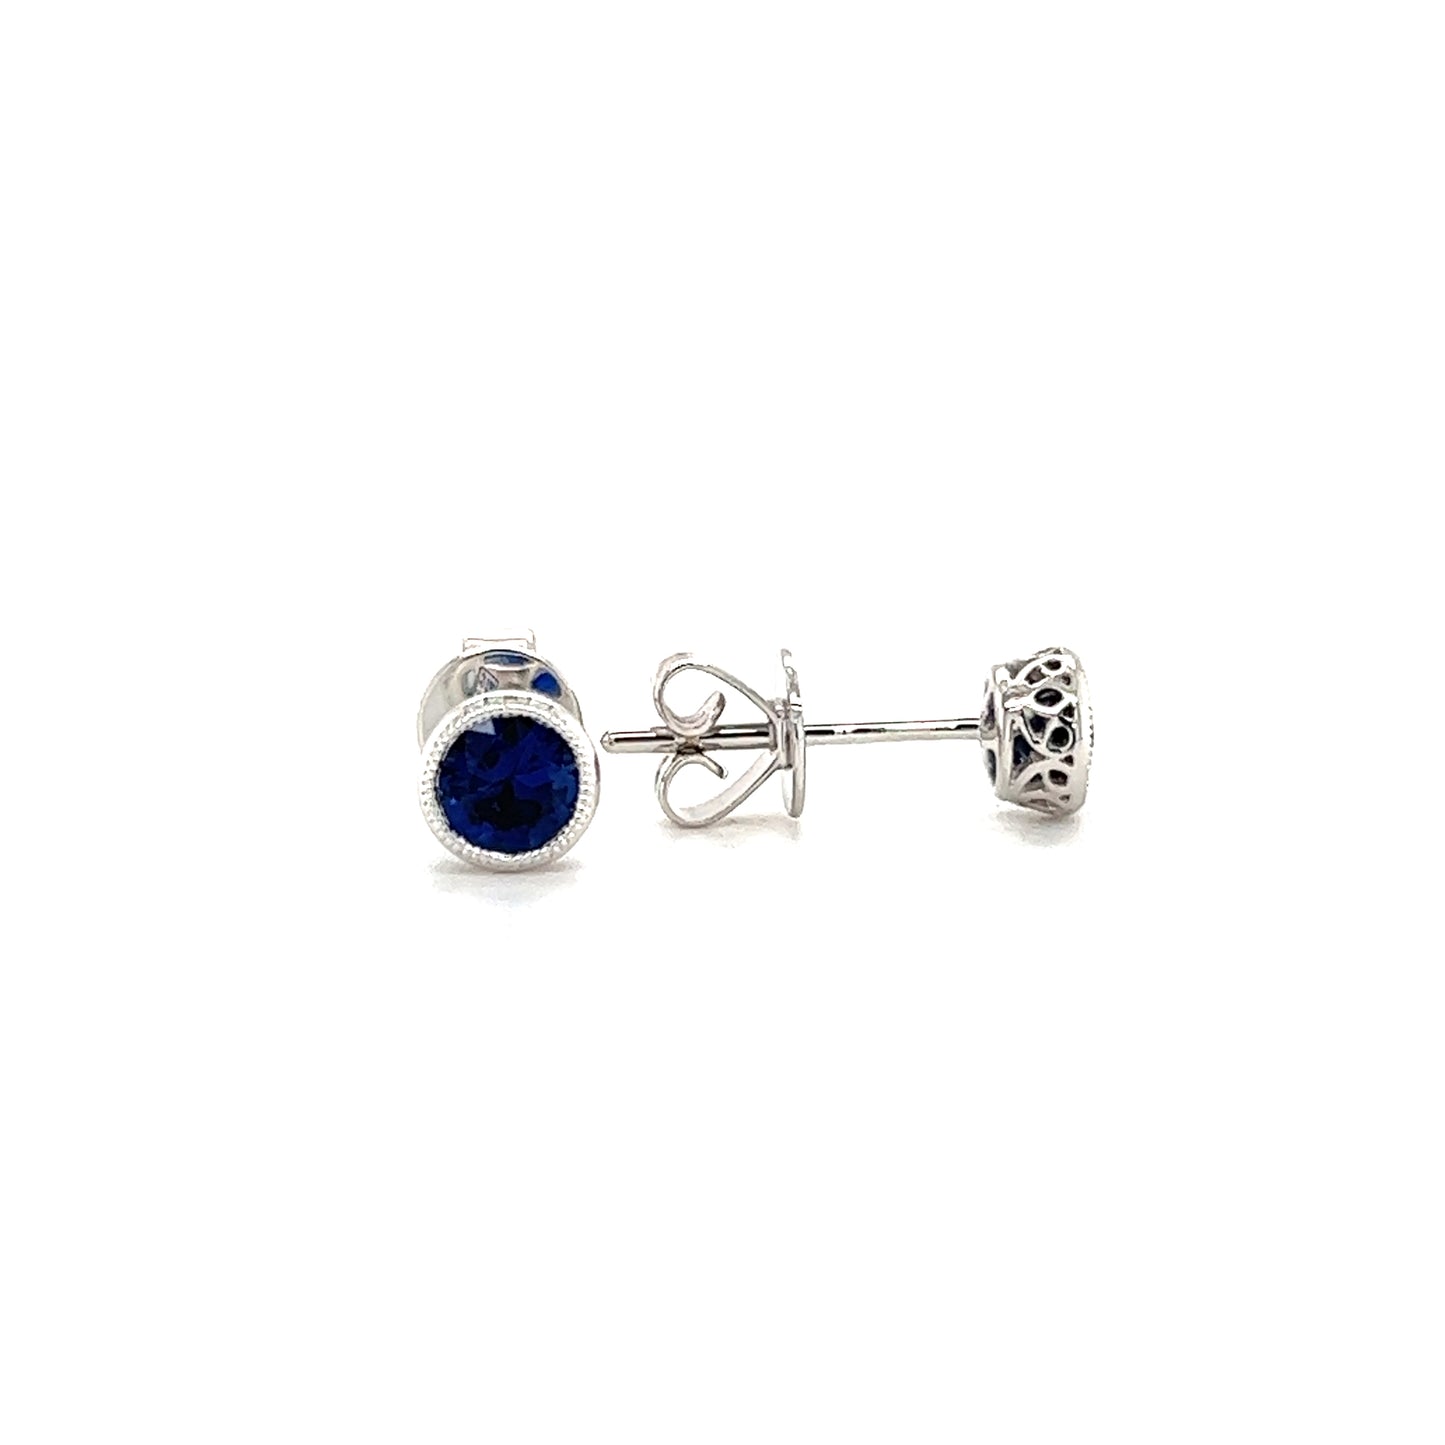 Round Sapphire Stud Earrings with Filigree and Milgrain in 14K White Gold Front and Side View